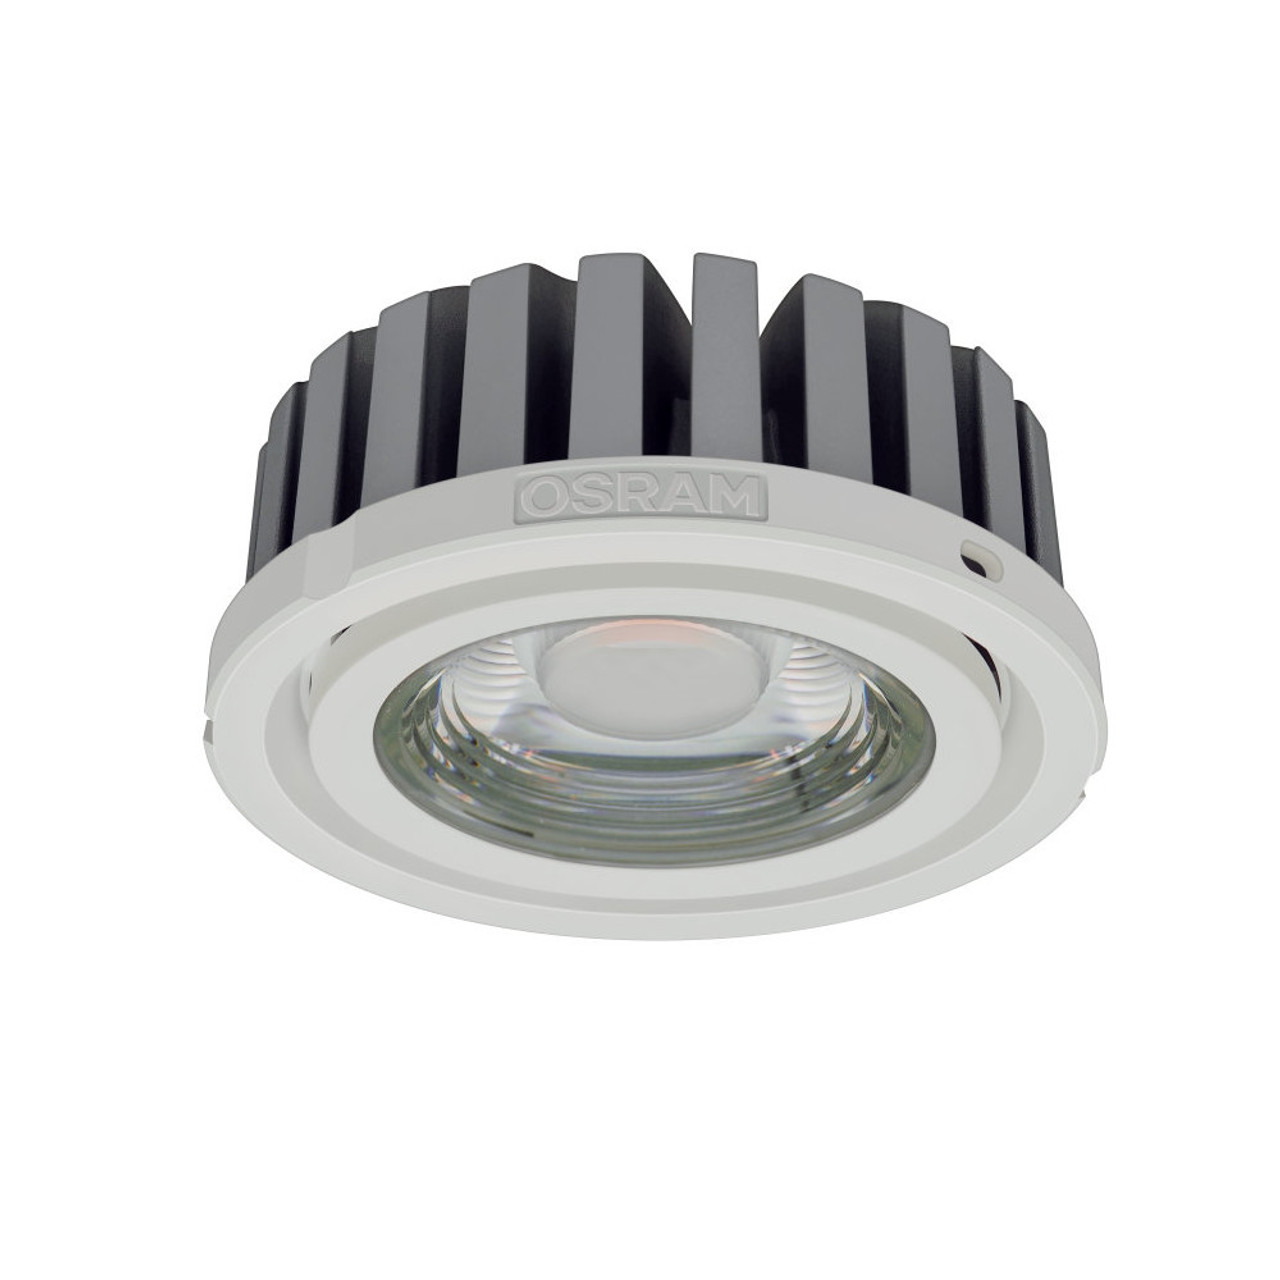 LED 700mA Constant Current 25.4W Dimmable 3500K CRi90 2450lm 15 degrees COB